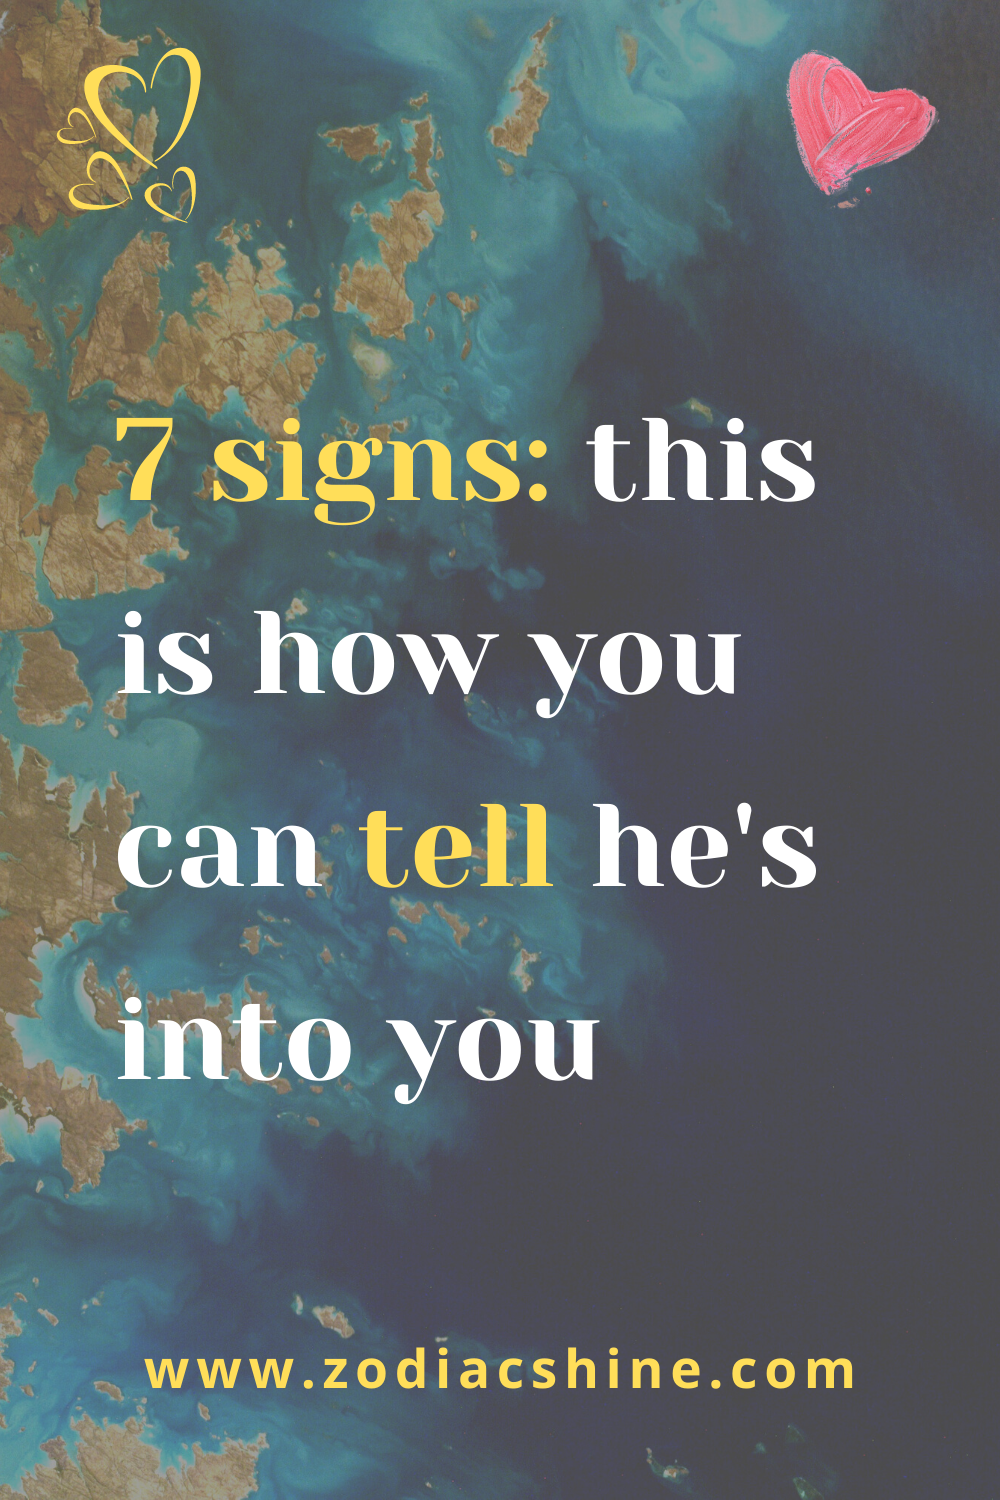 7 signs: this is how you can tell he's into you